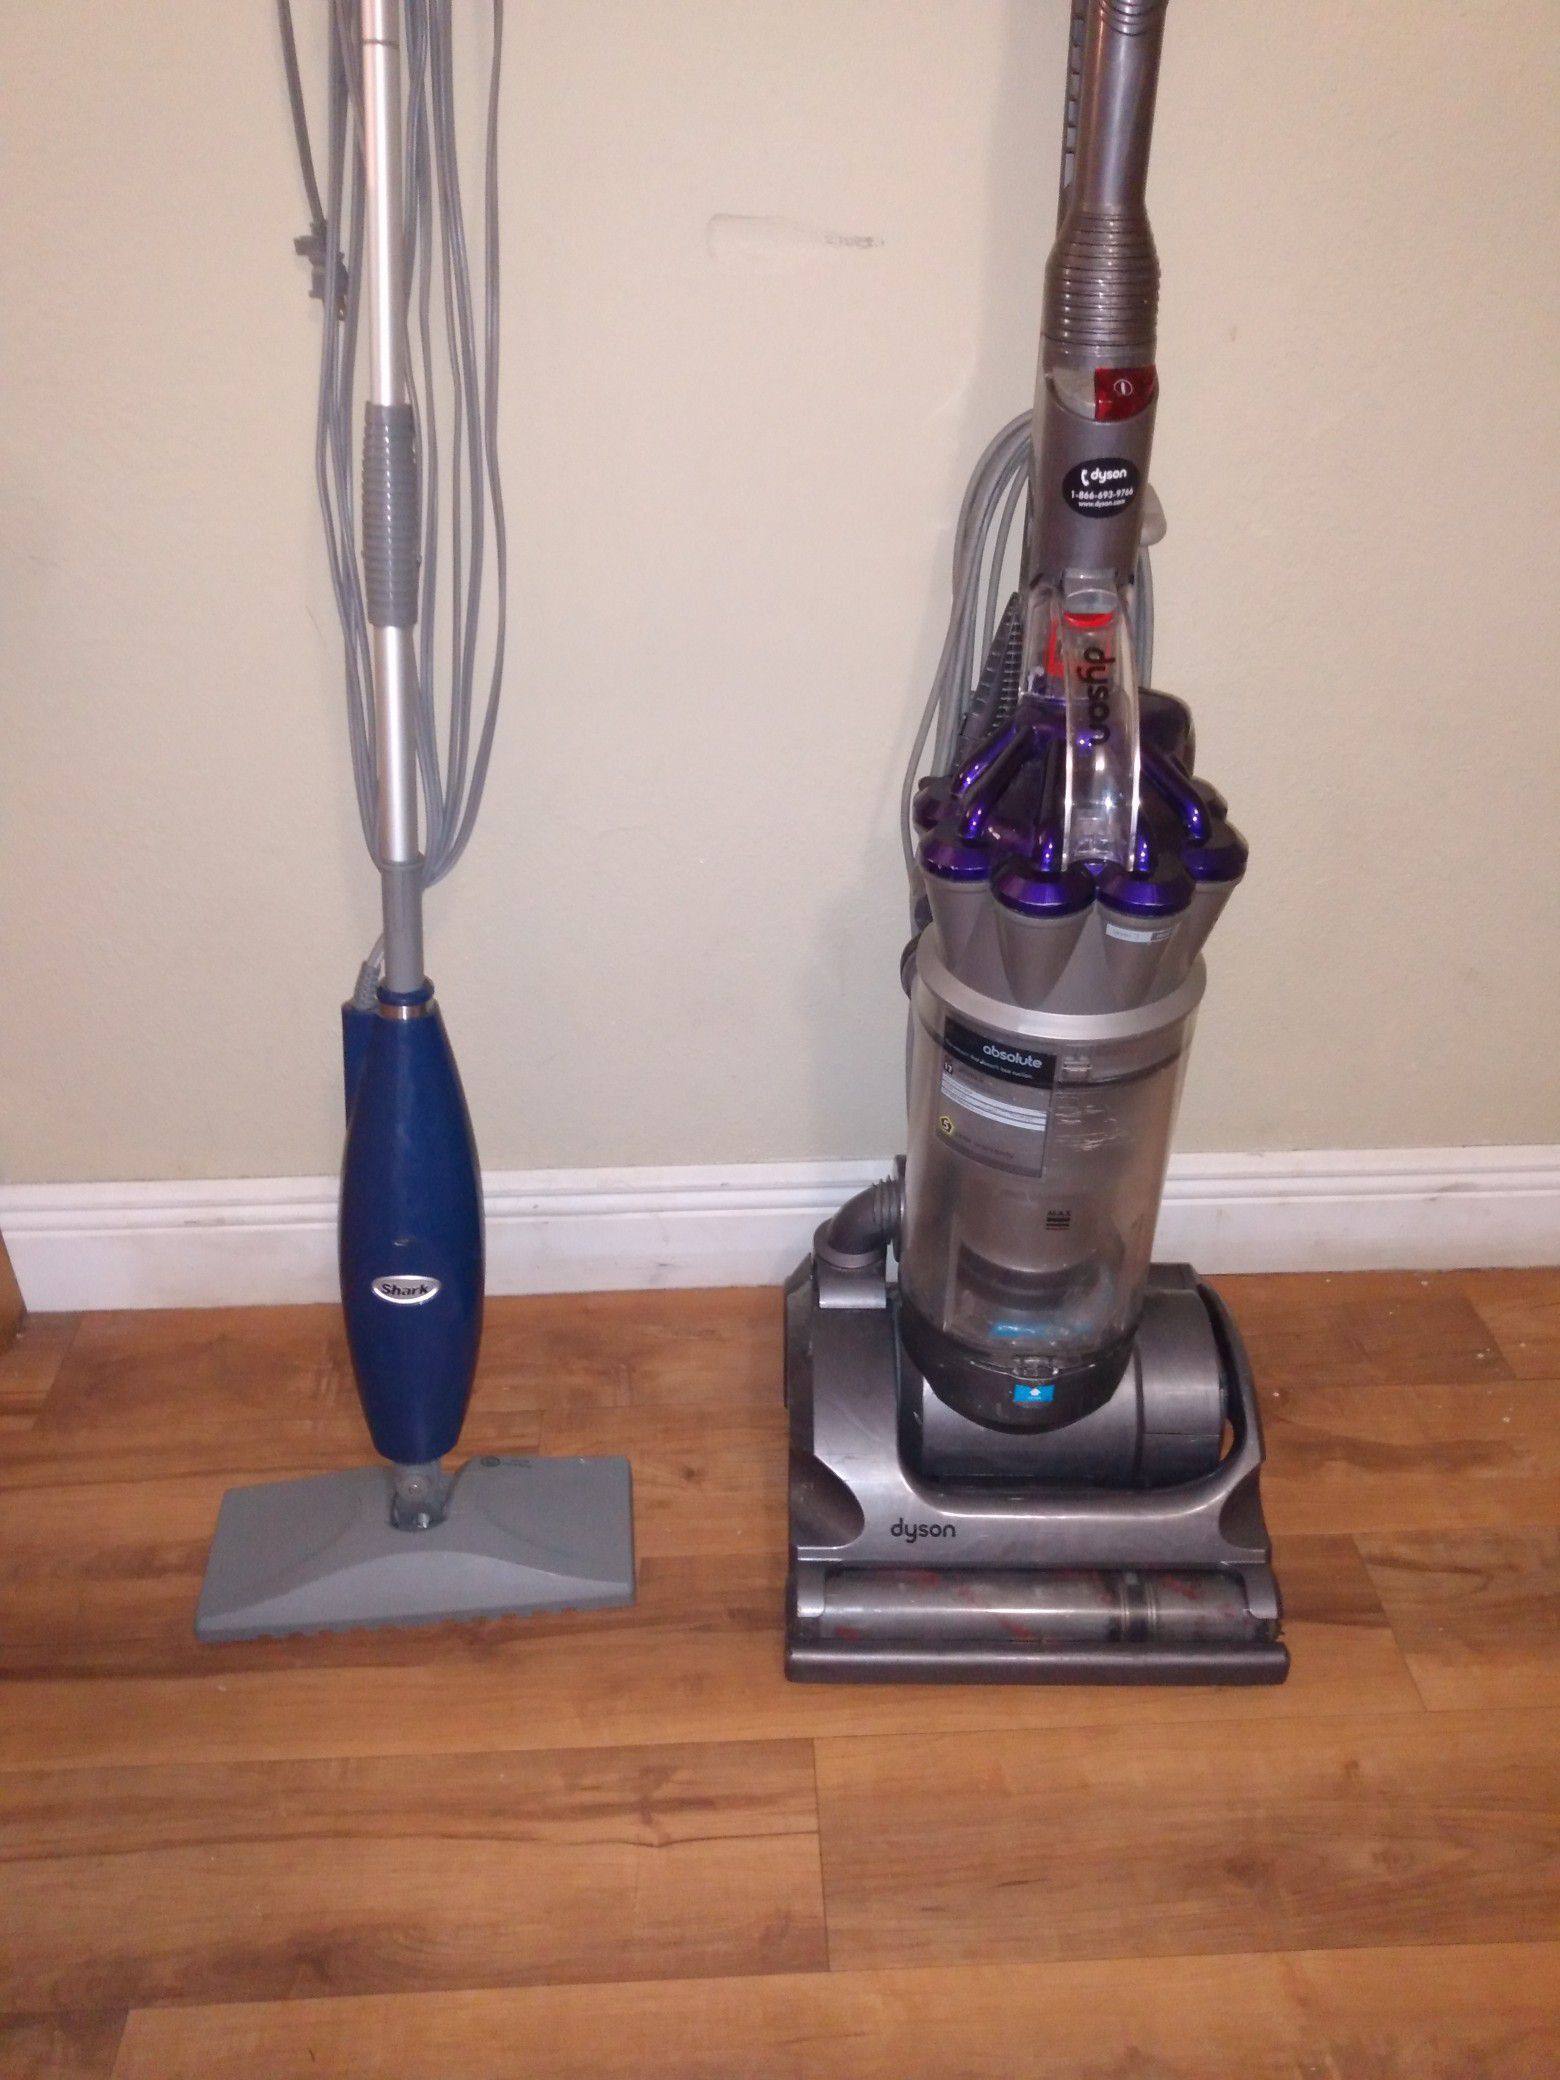 Vacuum cleaner and steam mop